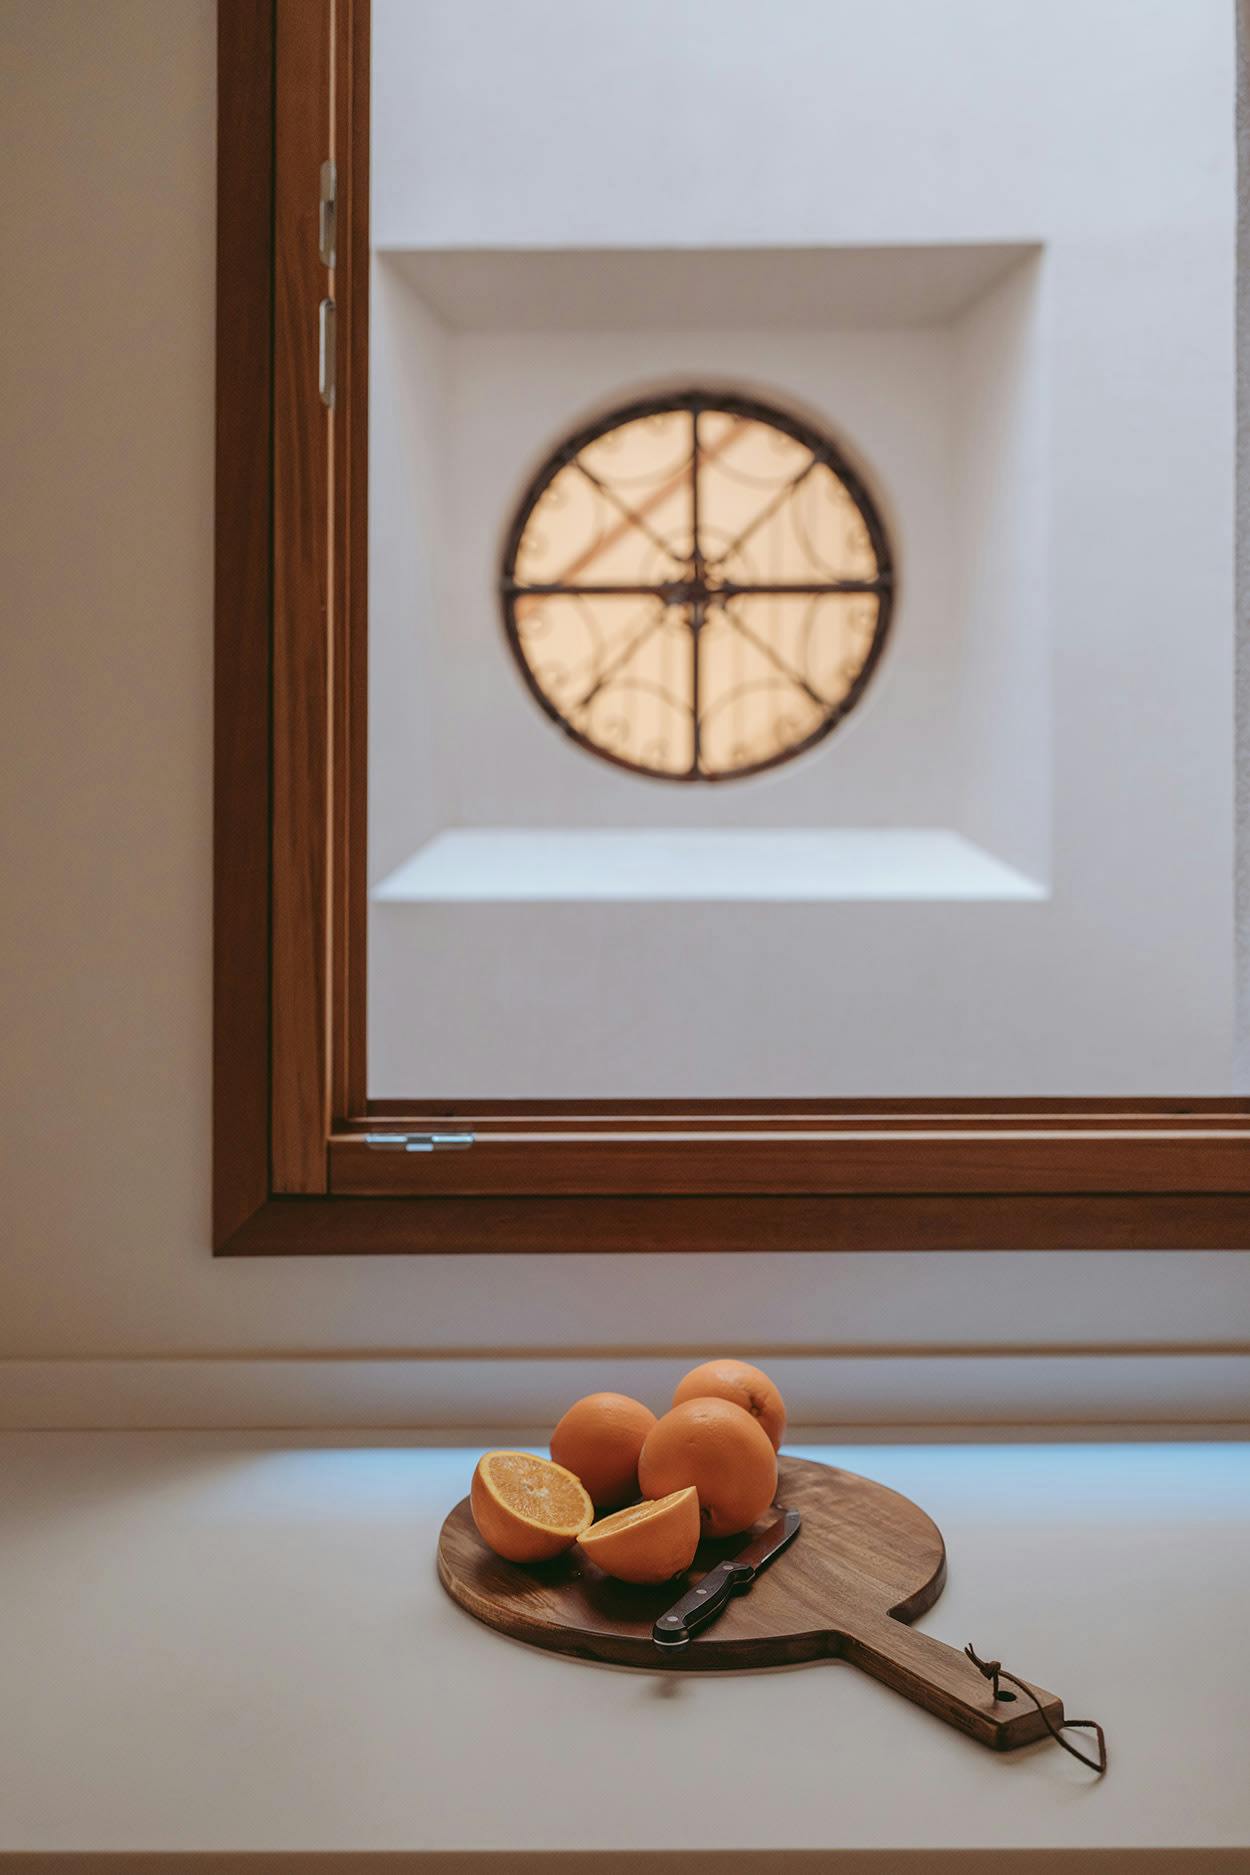 A window with a large, round, stained glass window is open, revealing a table with a bowl of oranges and a knife on it.